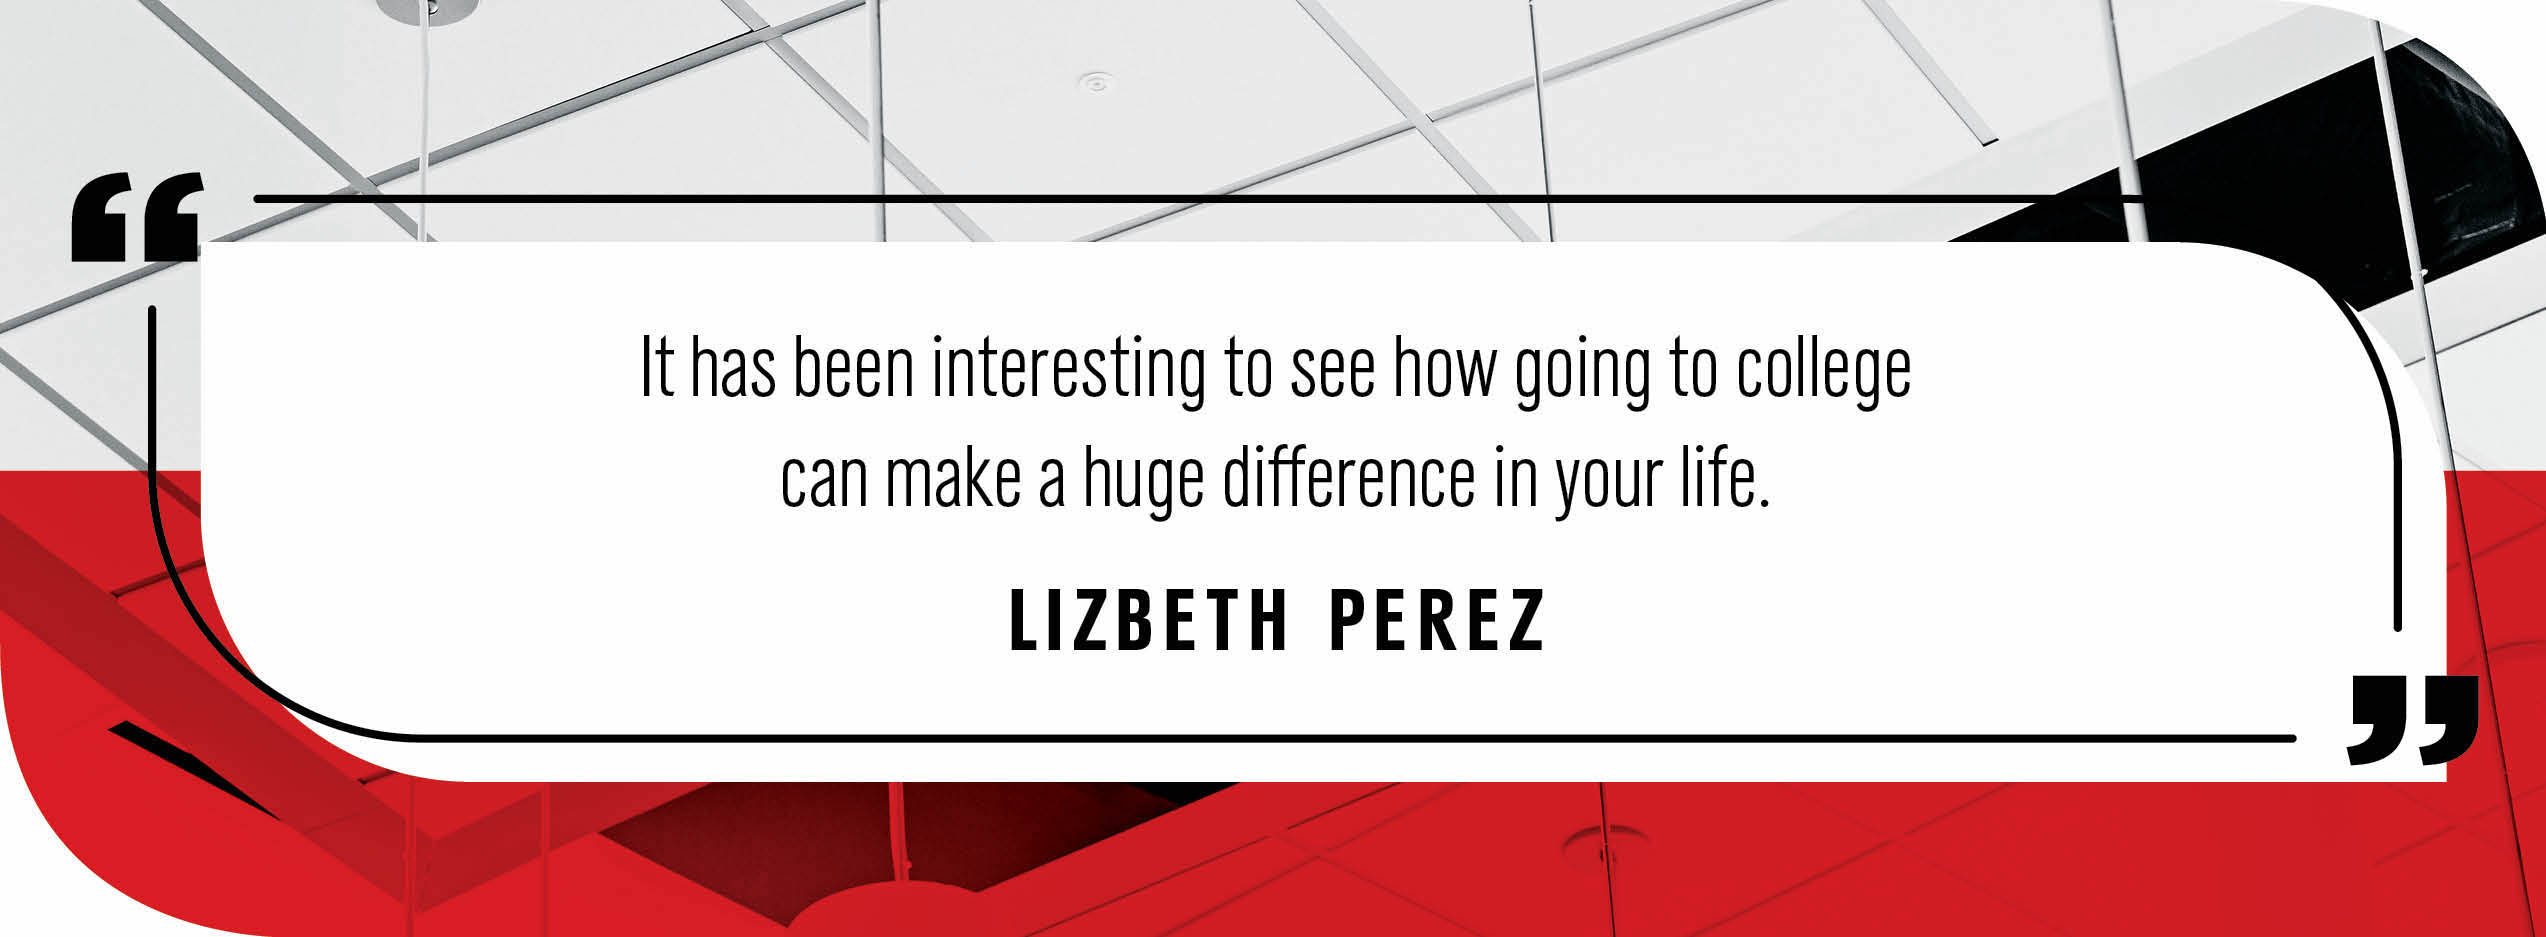 Quote by Lizbeth Perez: "It has been interesting to see how going to college can make a huge difference in your life."